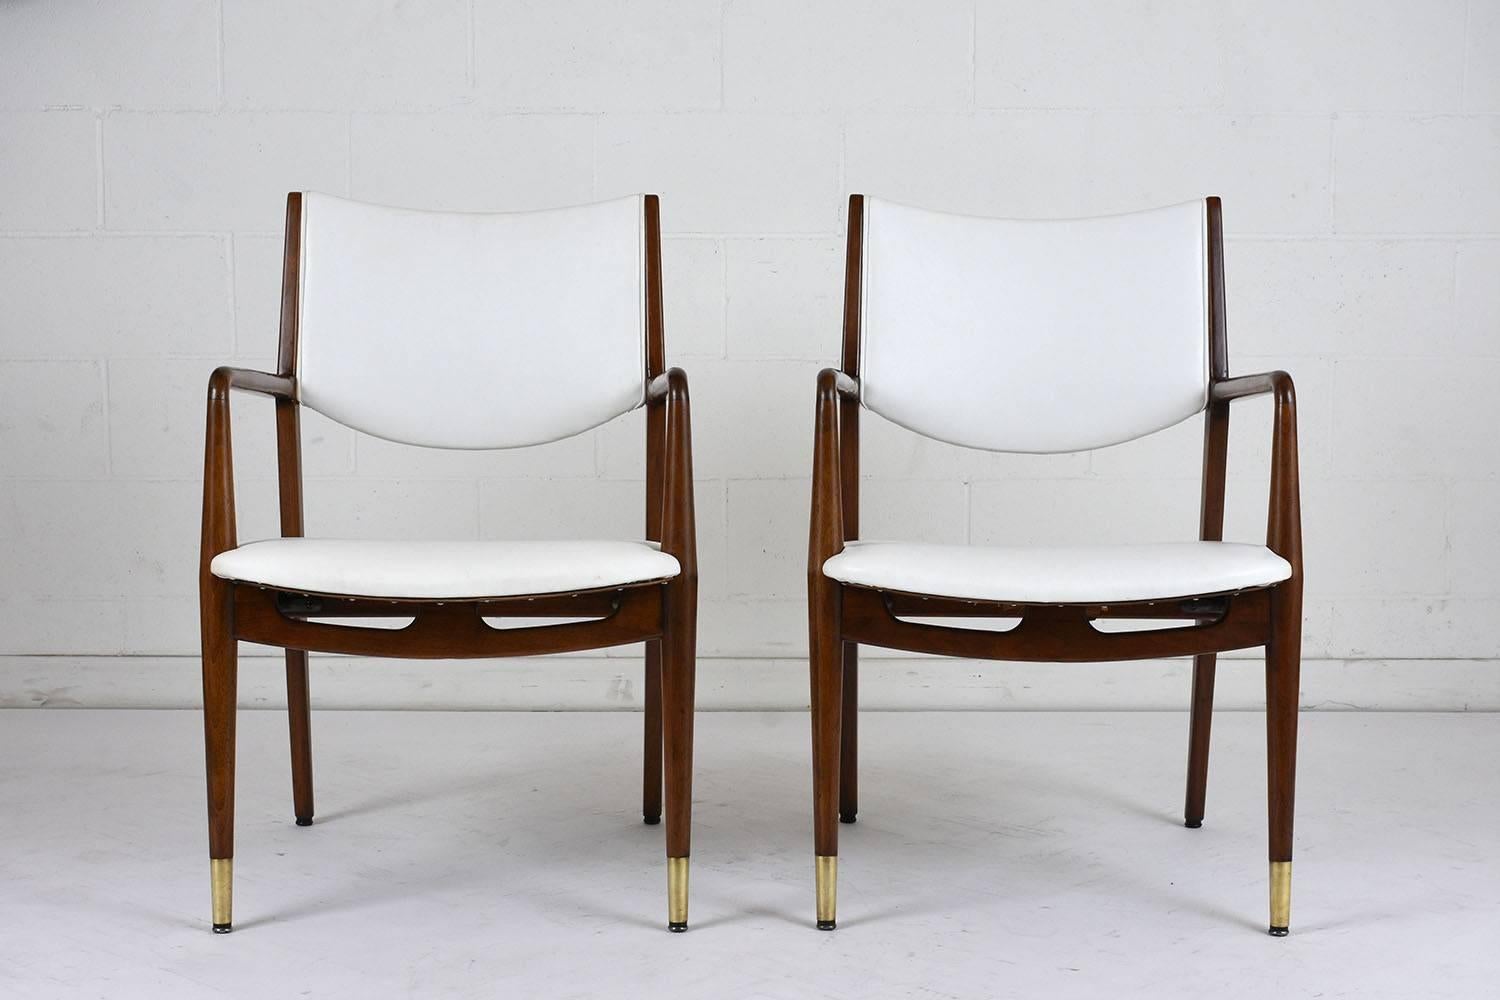 This pair of 1960s Mid-Century Modern style lounge chairs features a walnut wood frame that has been stained a rich walnut color with a lacquered finish. The frame has a classic frame with a decorative front edge and tapered legs. The font legs have